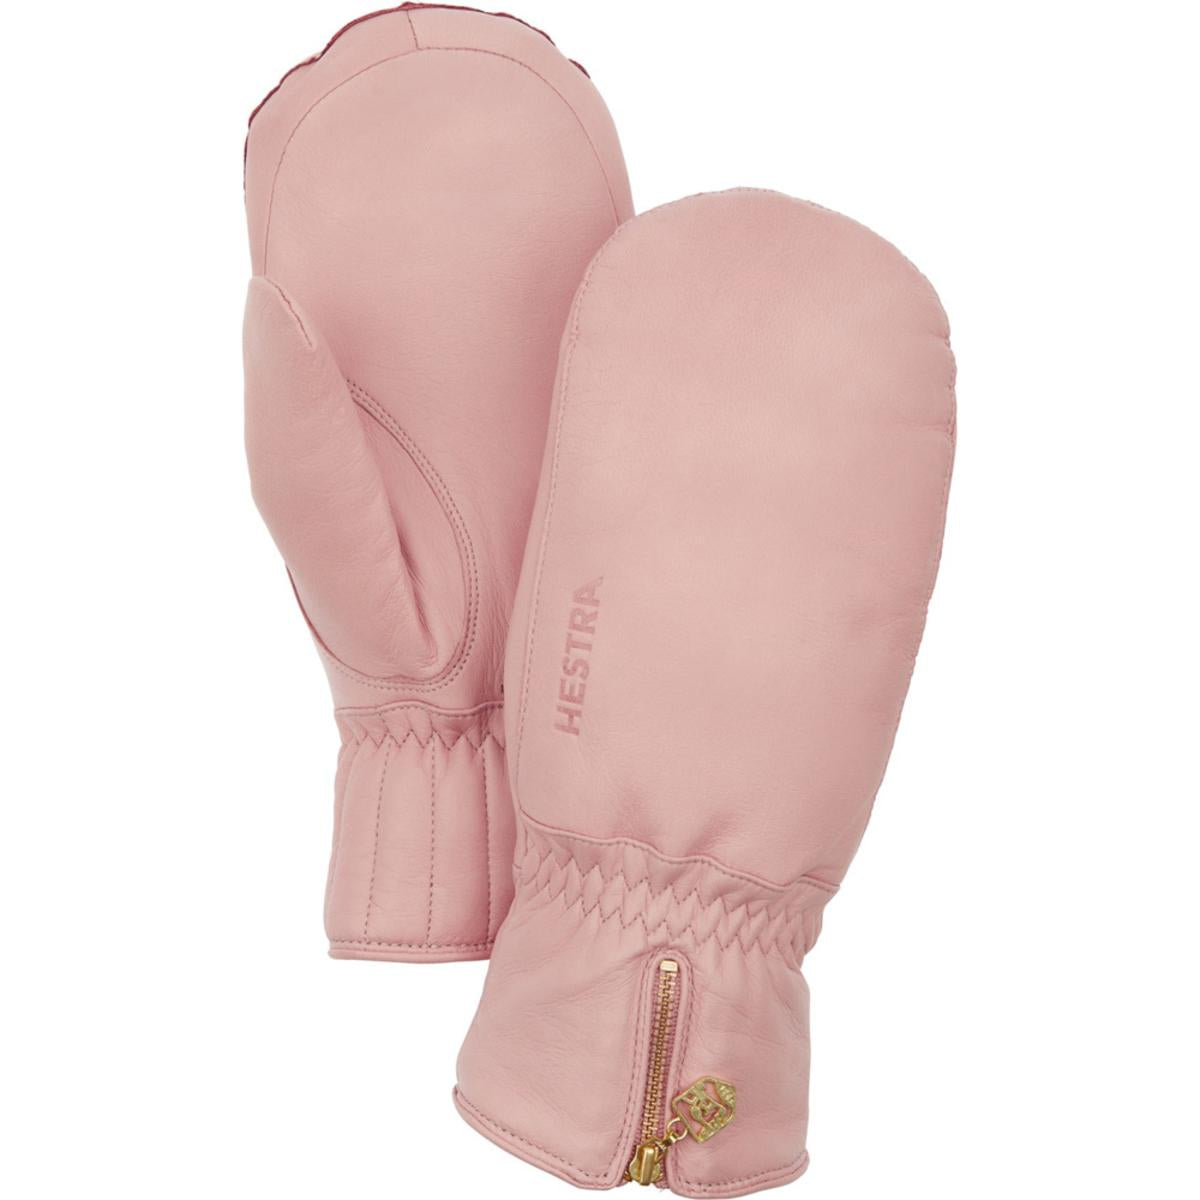 Hestra Leather Swisswool Classic Mitts